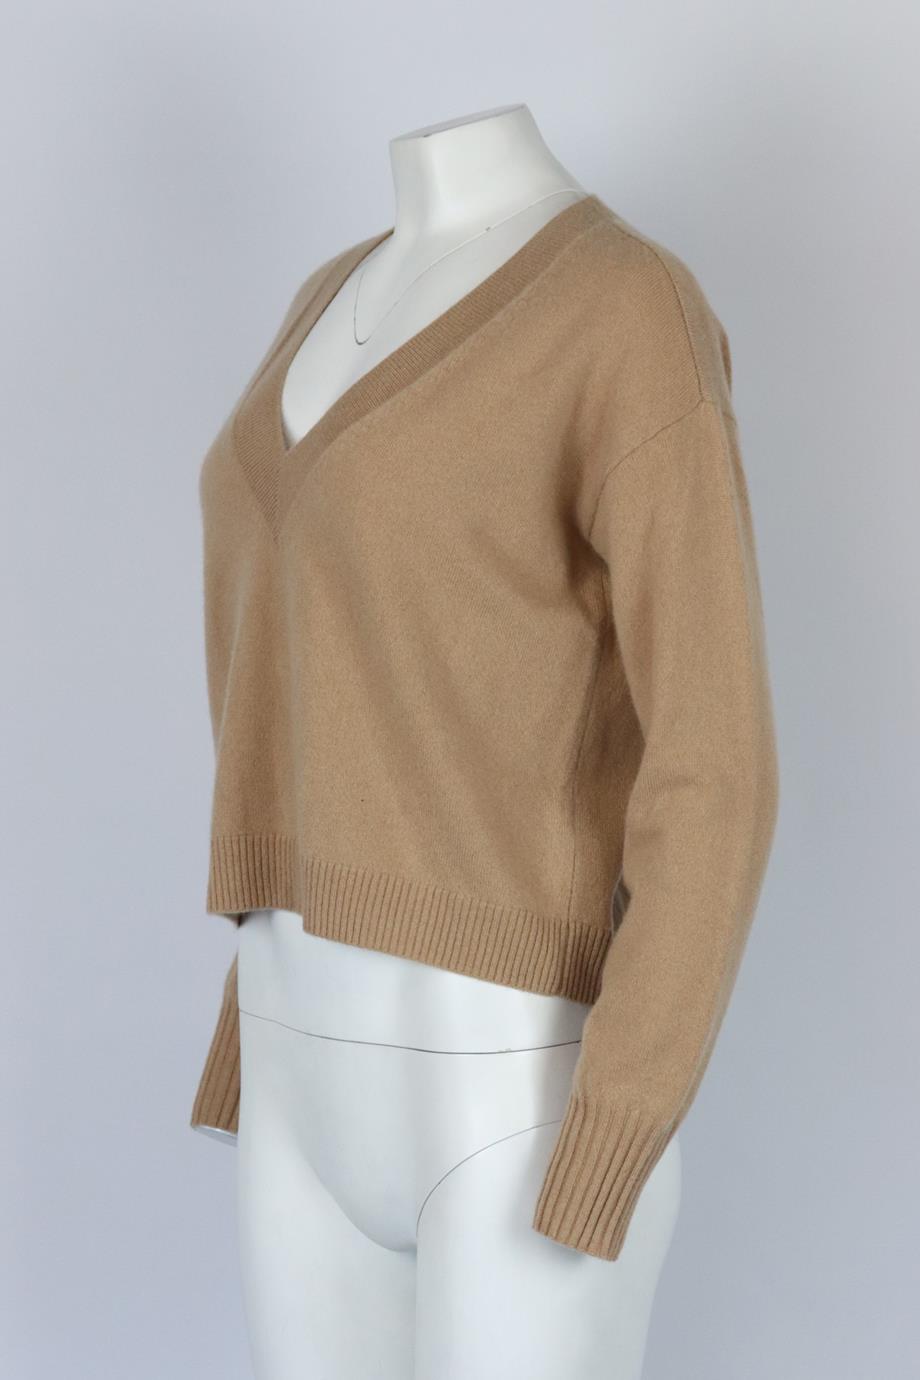 INTERMIX CROPPED CASHMERE SWEATER SMALL